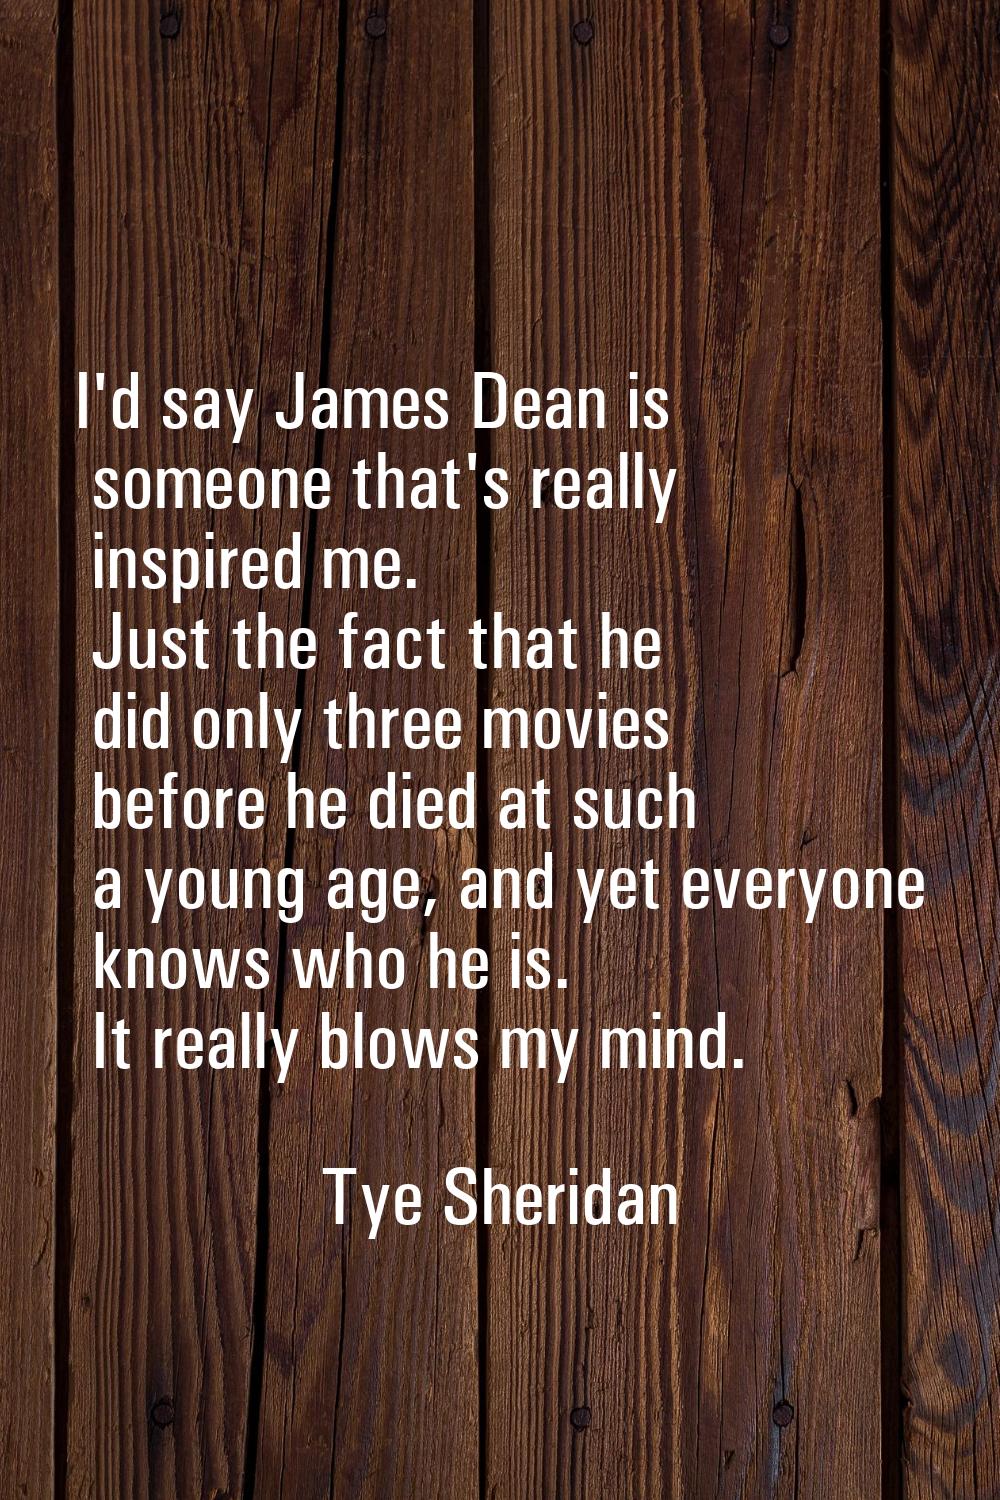 I'd say James Dean is someone that's really inspired me. Just the fact that he did only three movie